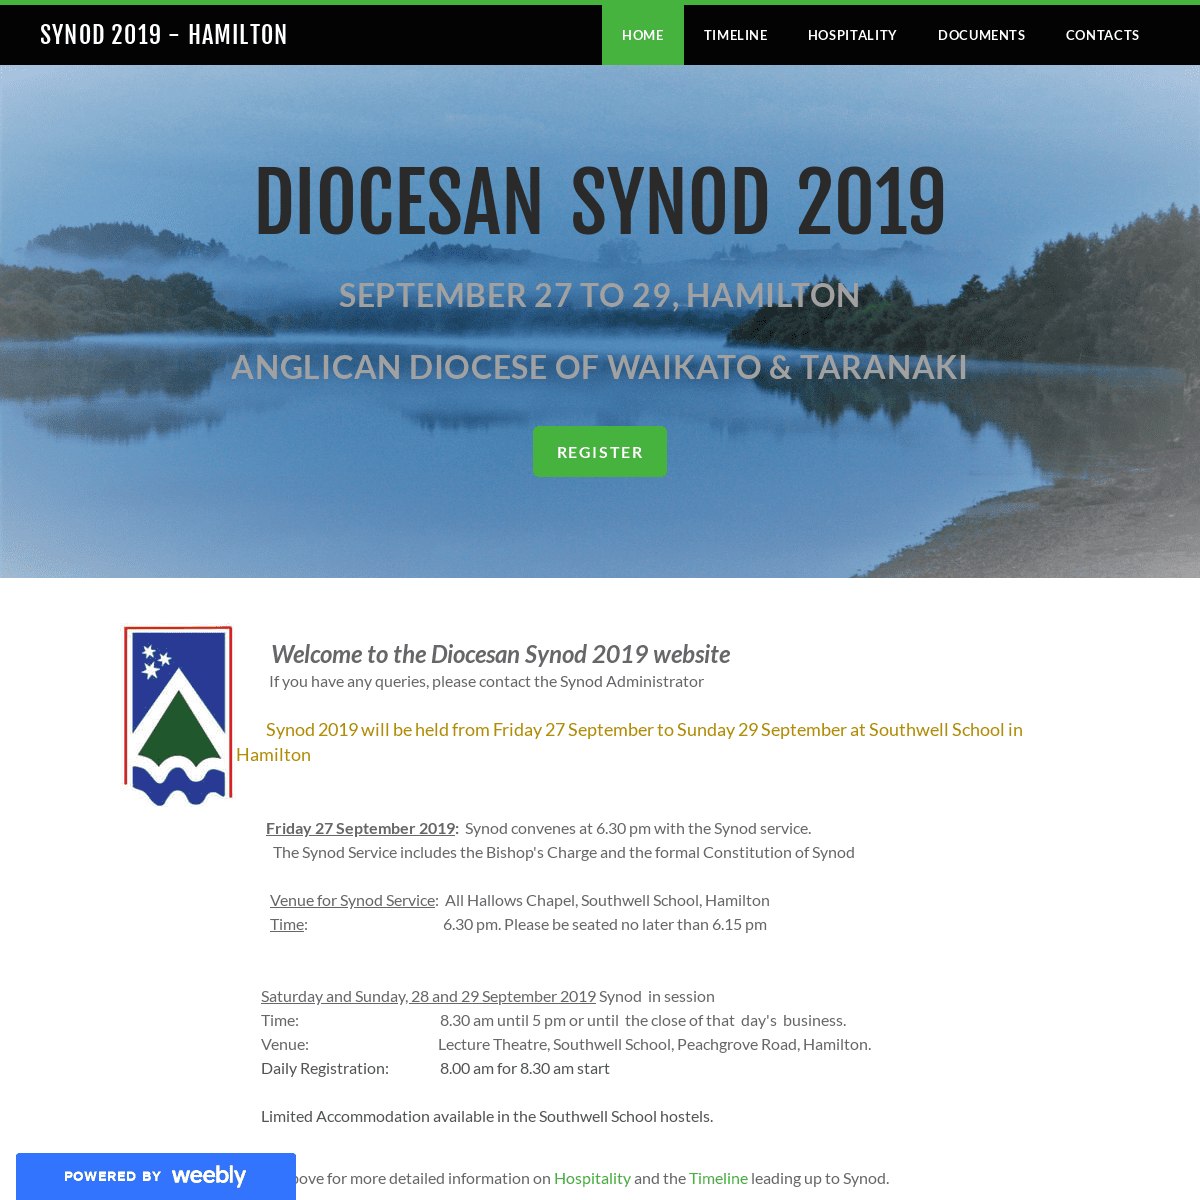 A complete backup of diocesansynod.weebly.com